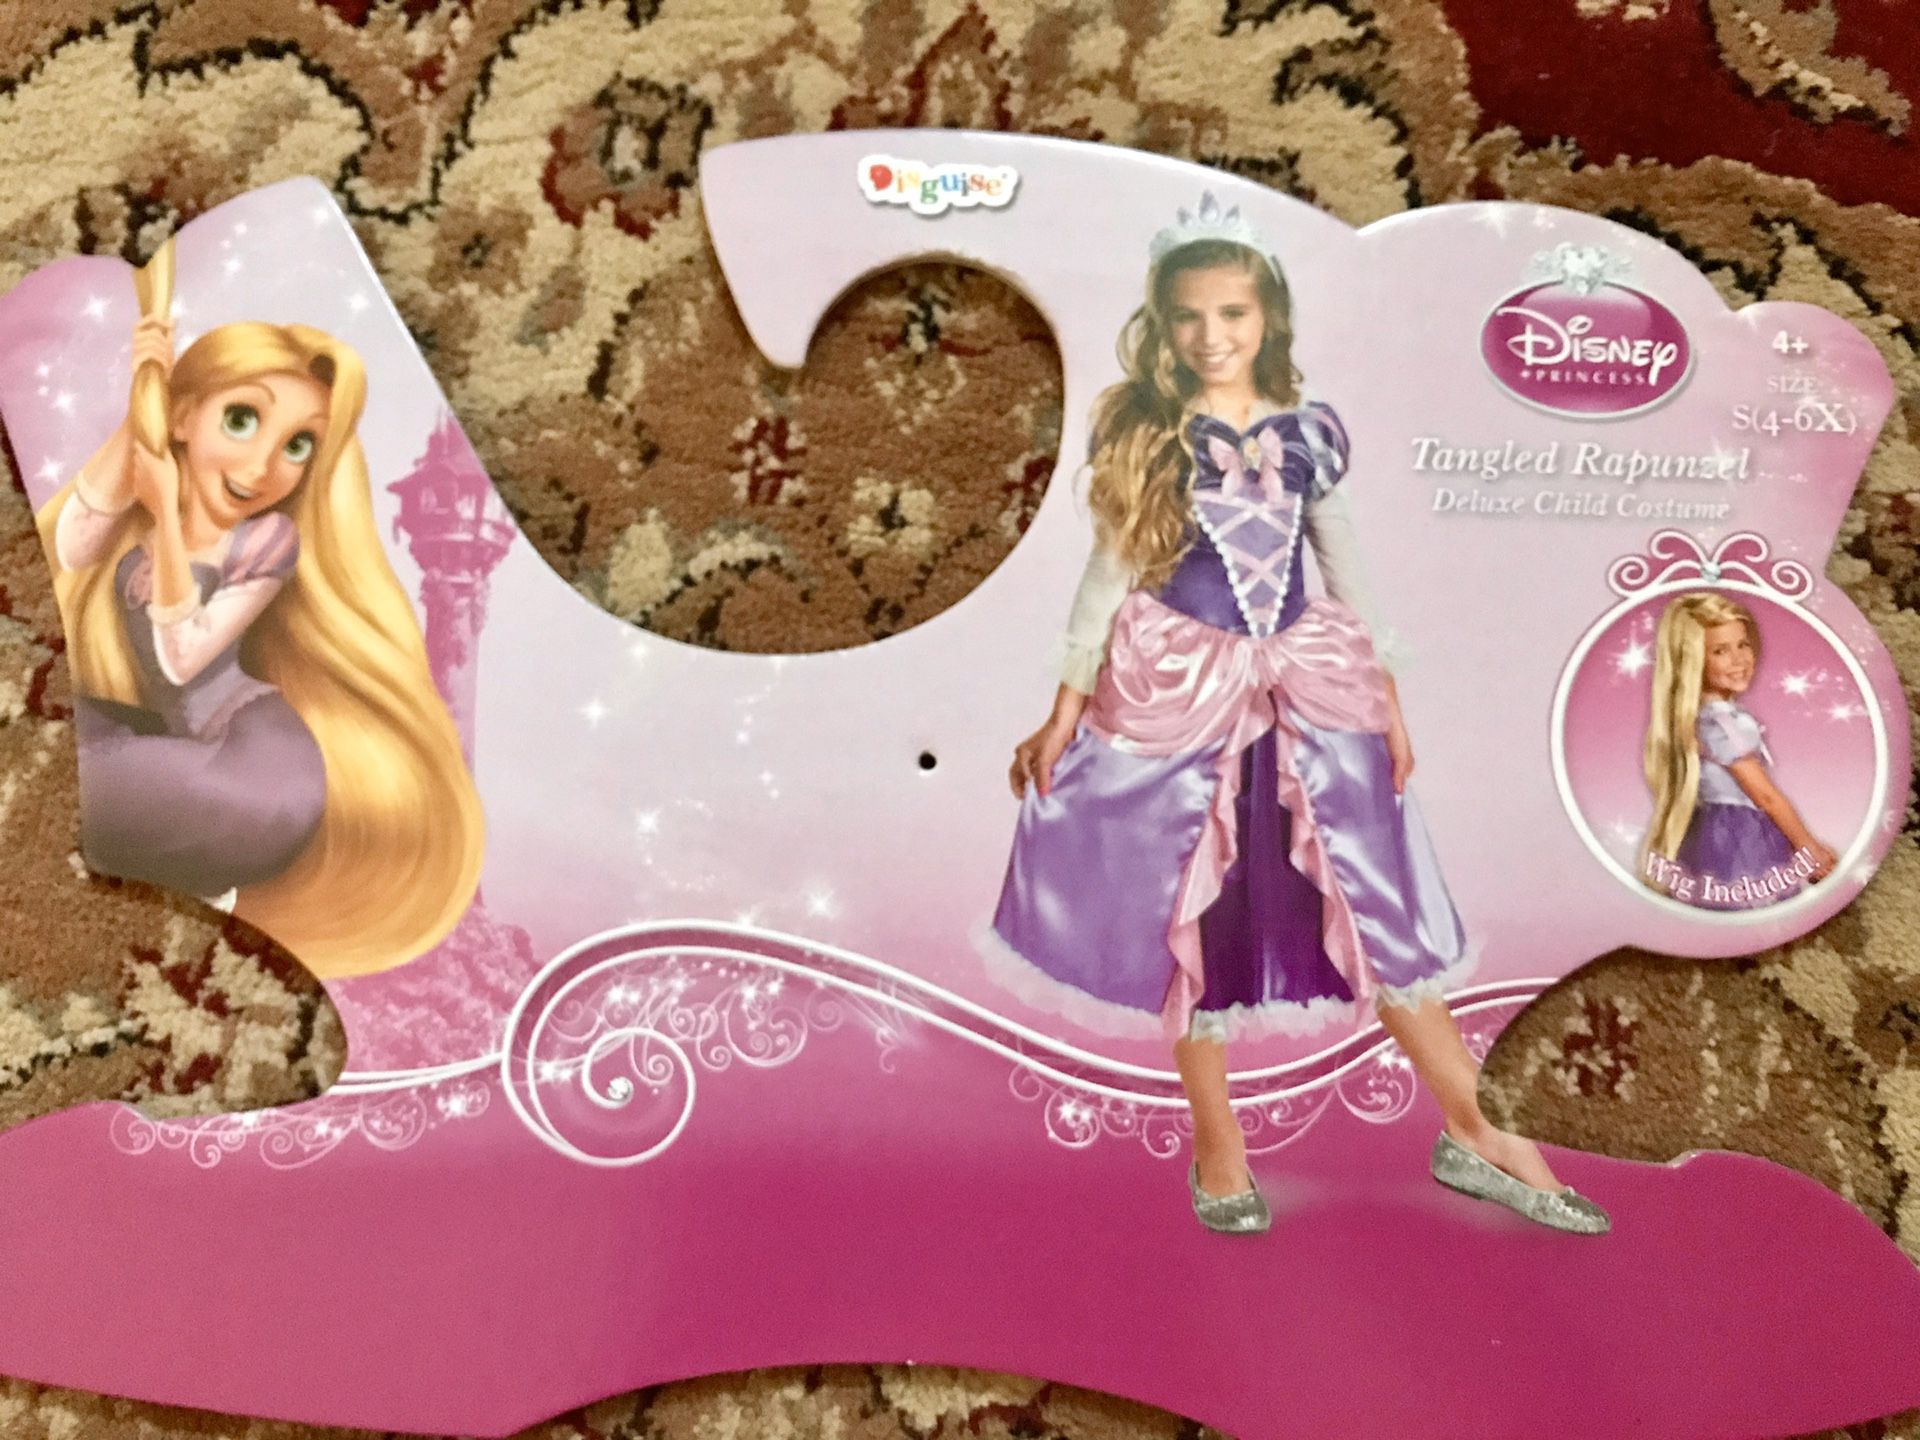 Tangled rapunzel costume size small